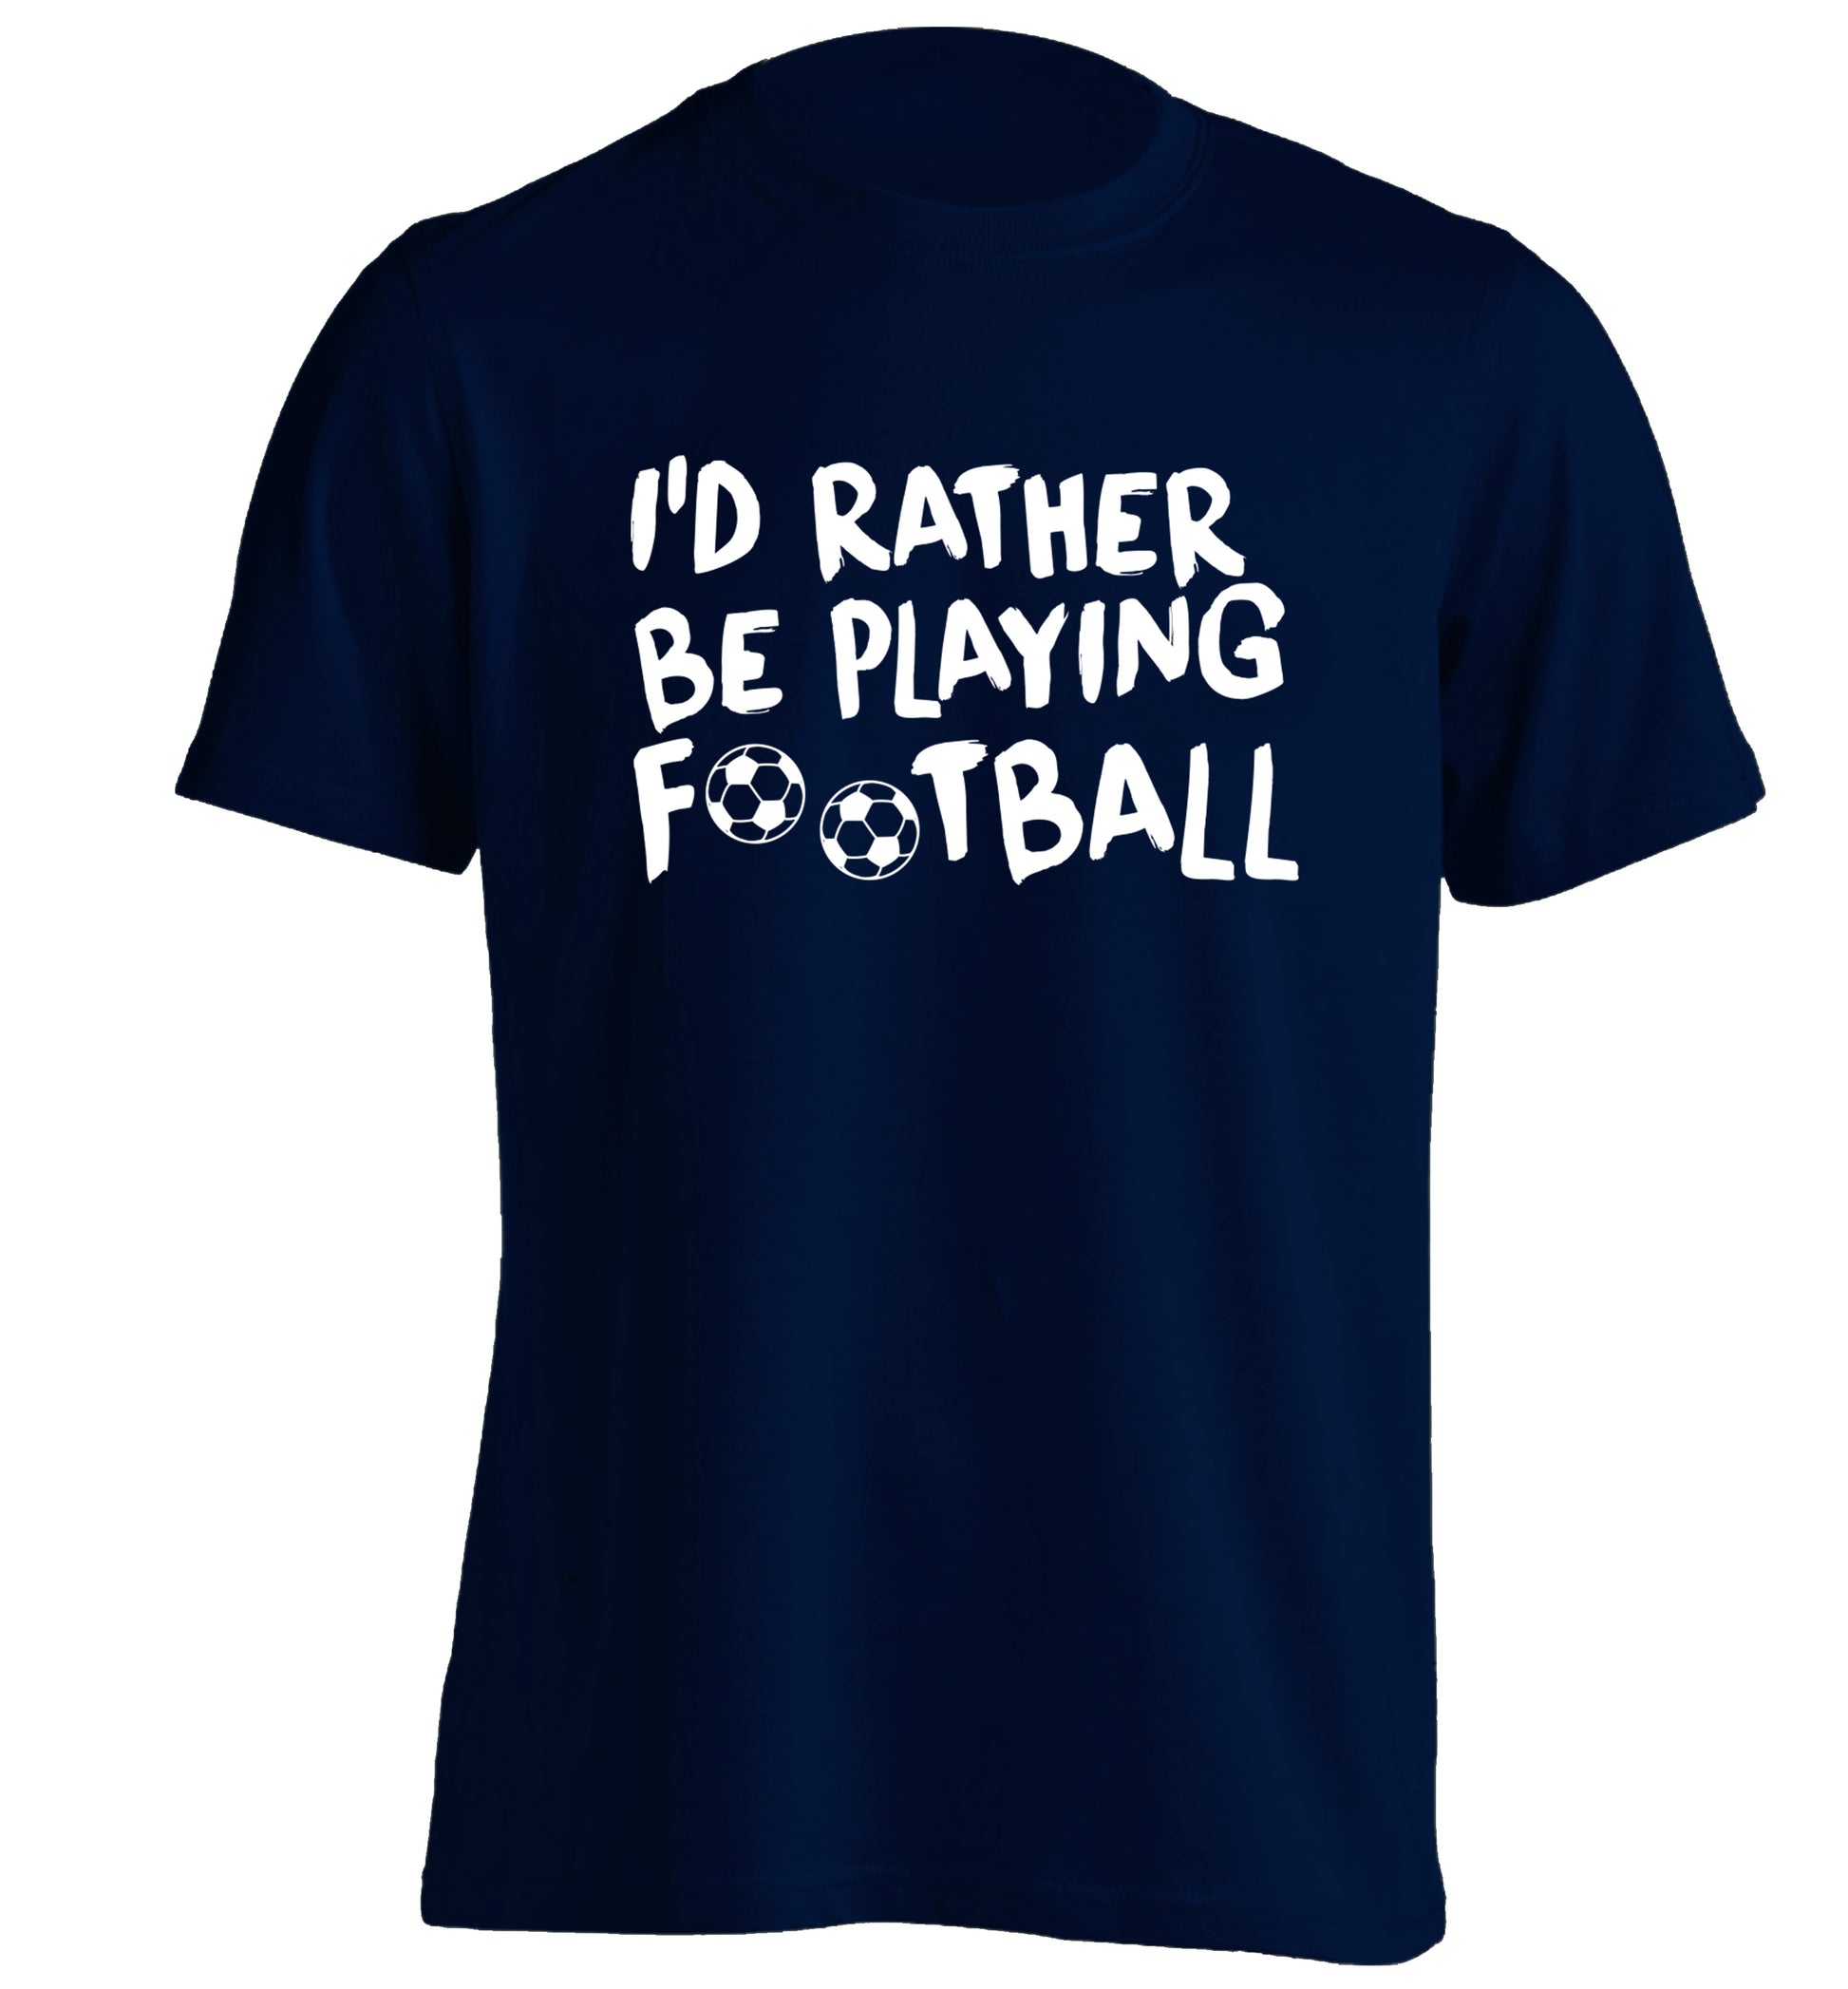 I'd rather be playing football adults unisexnavy Tshirt 2XL